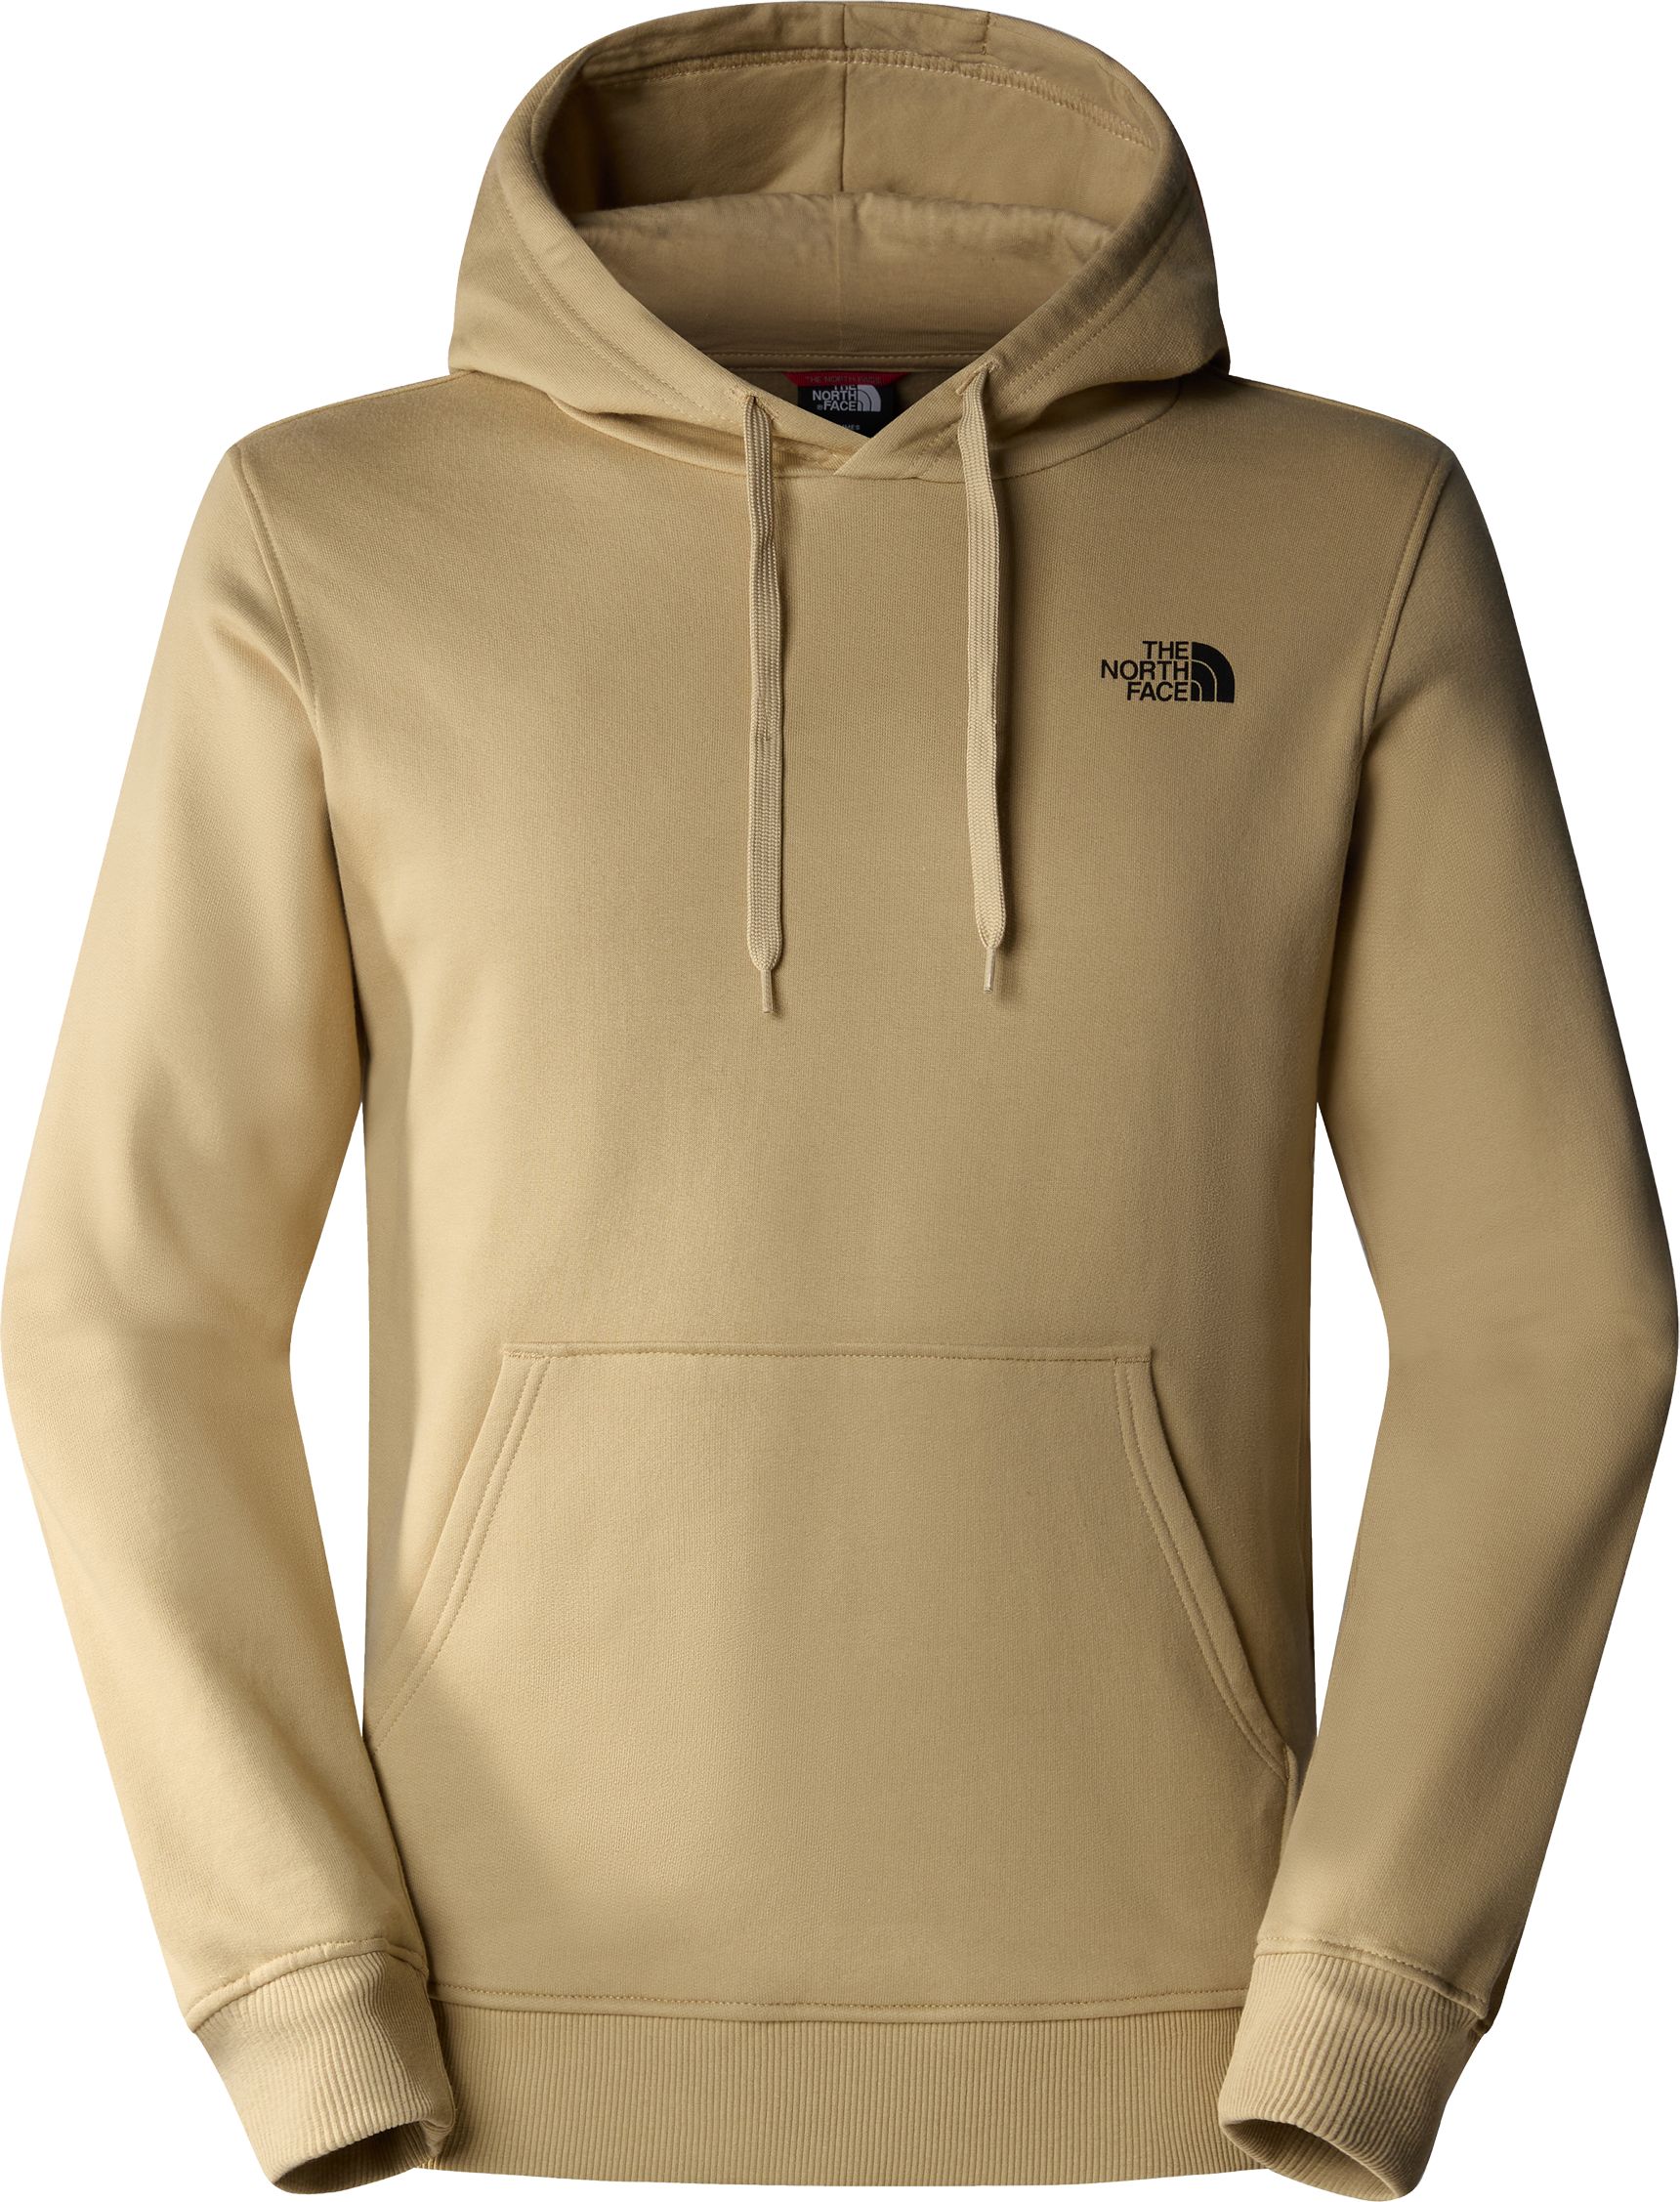 THE NORTH FACE, M SD HOODIE